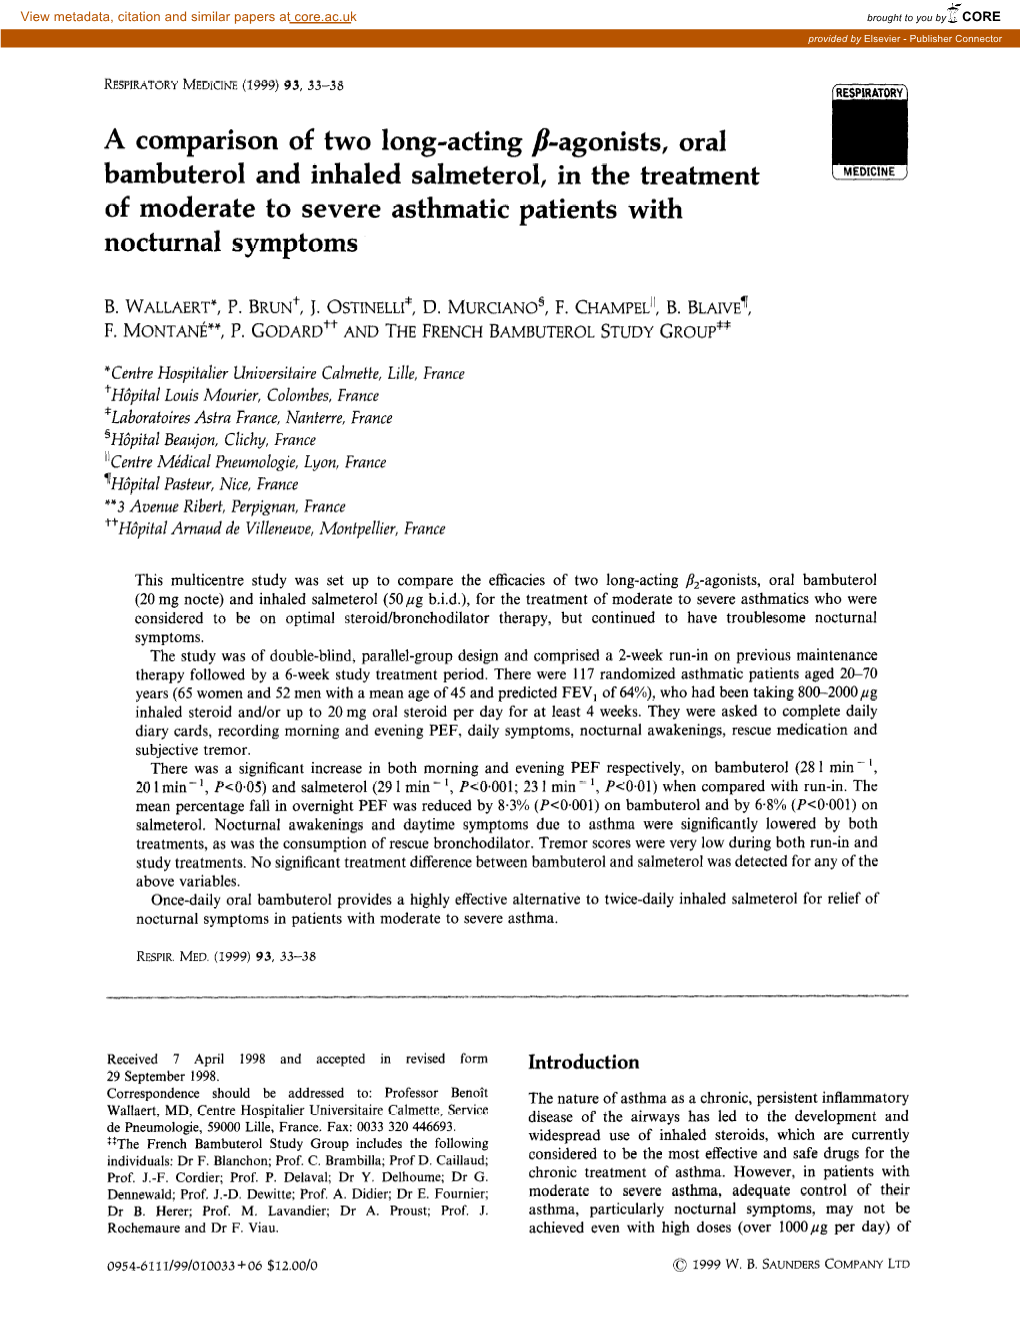 A Comparison of Two Long-Acting P-Agonists, Oral Bambuterol and Inhaled Salmeterol, in the Treatment of Moderate to Severe Asthmatic Patients with Nocturnal Symptoms